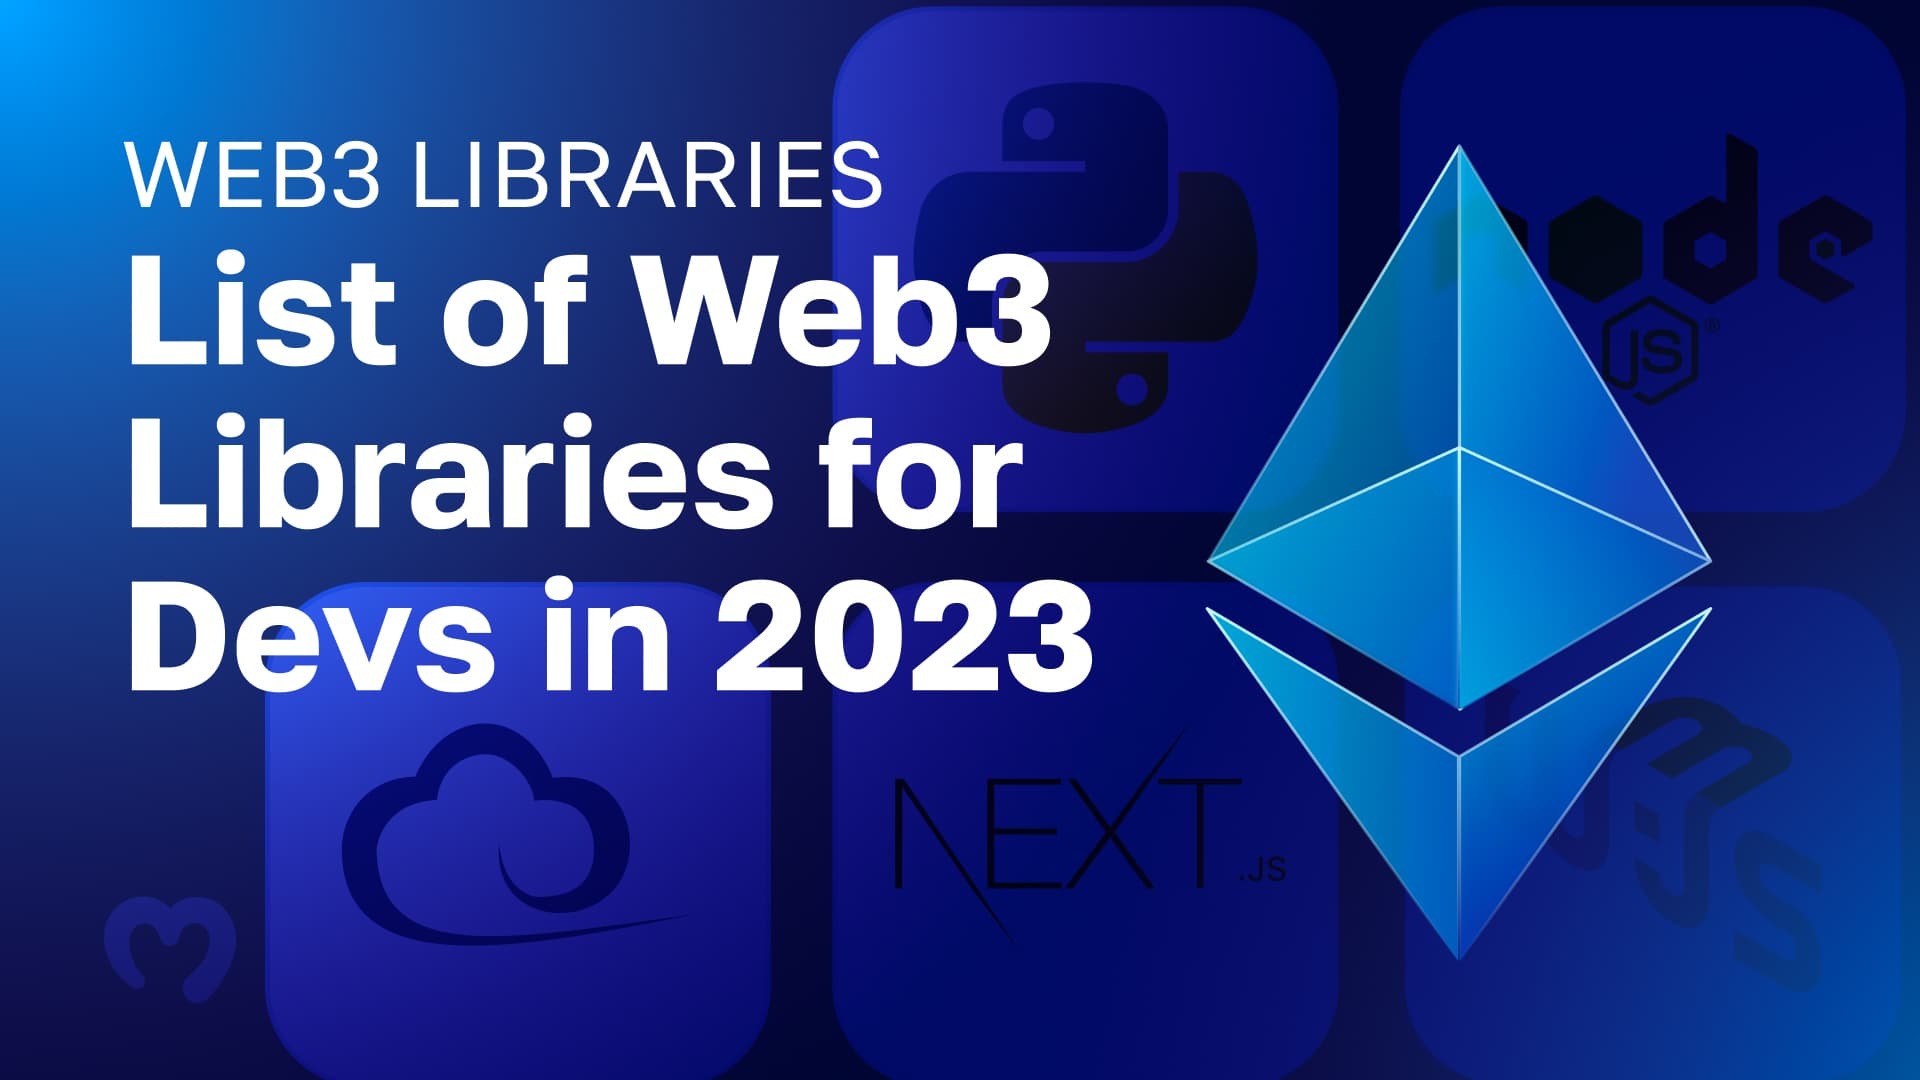 Web3 Libraries - List of Web3 Libraries for Devs in 2023